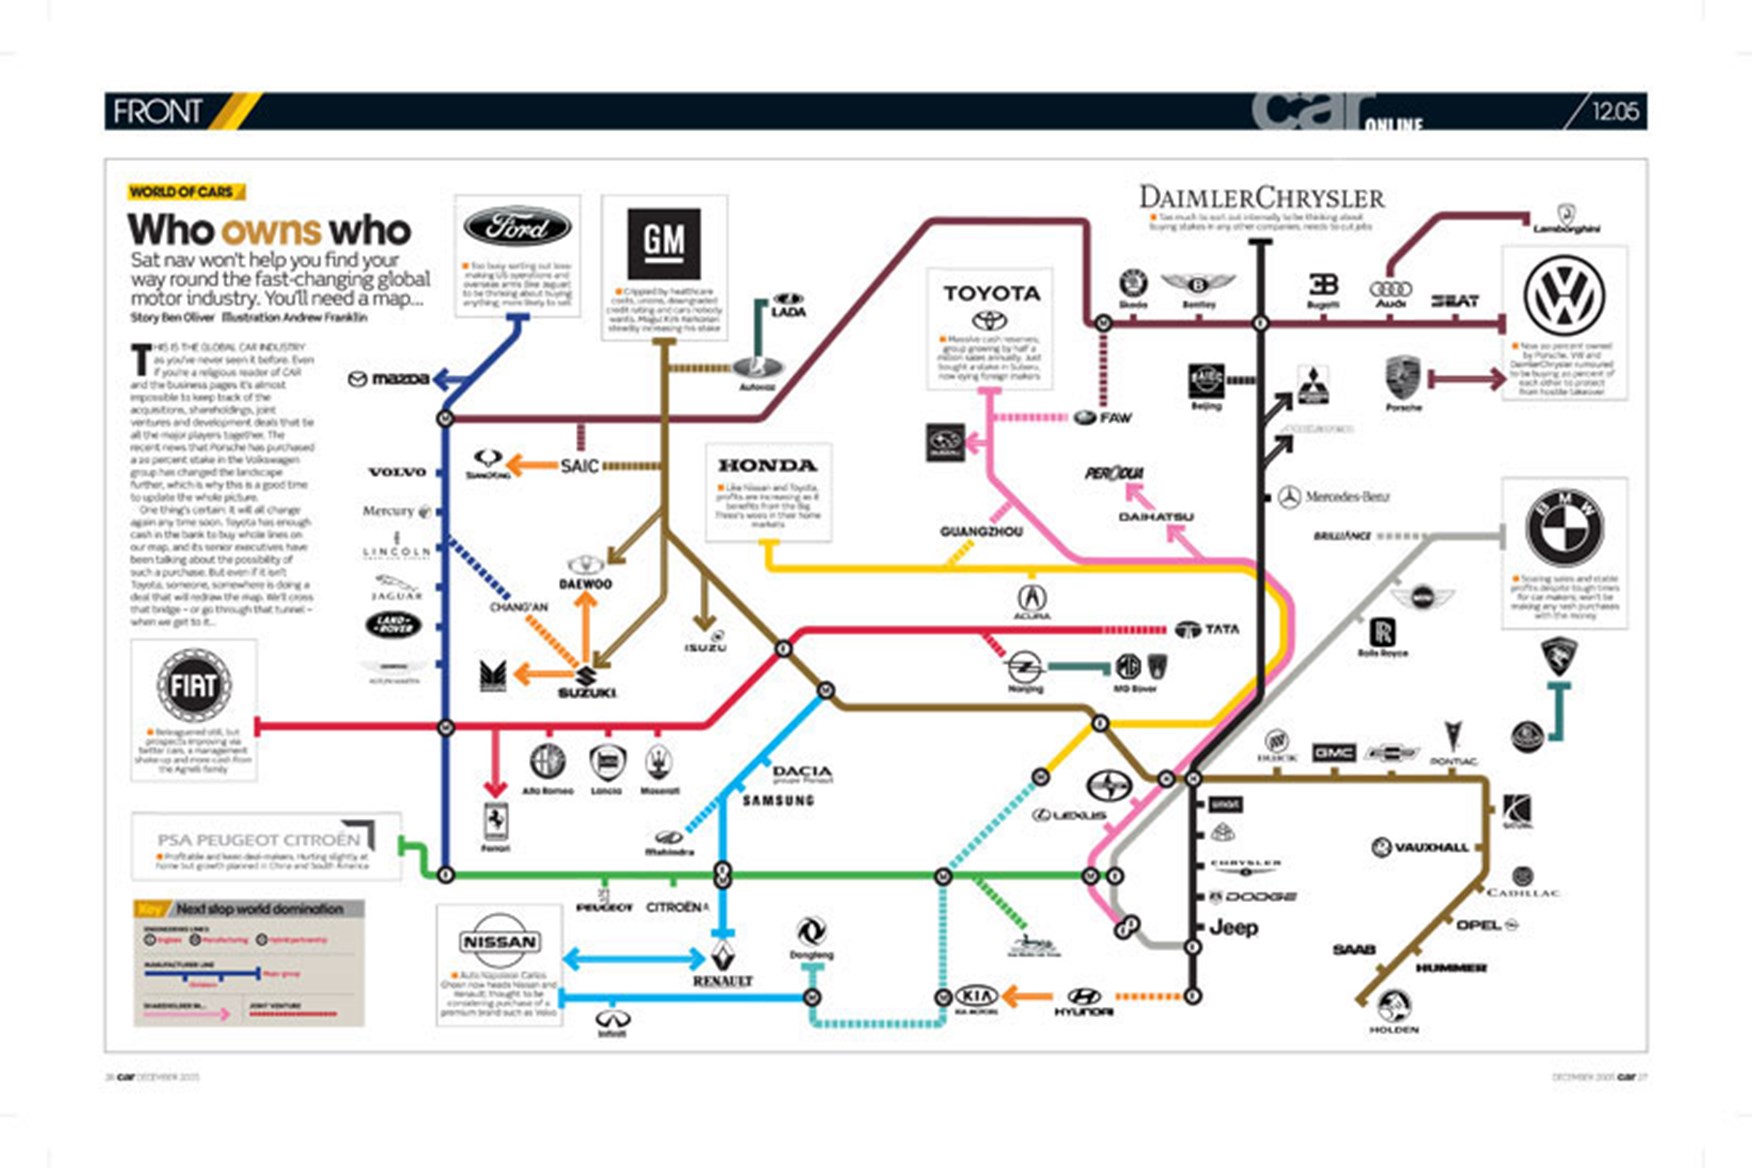 Auto Industry Ownership Chart